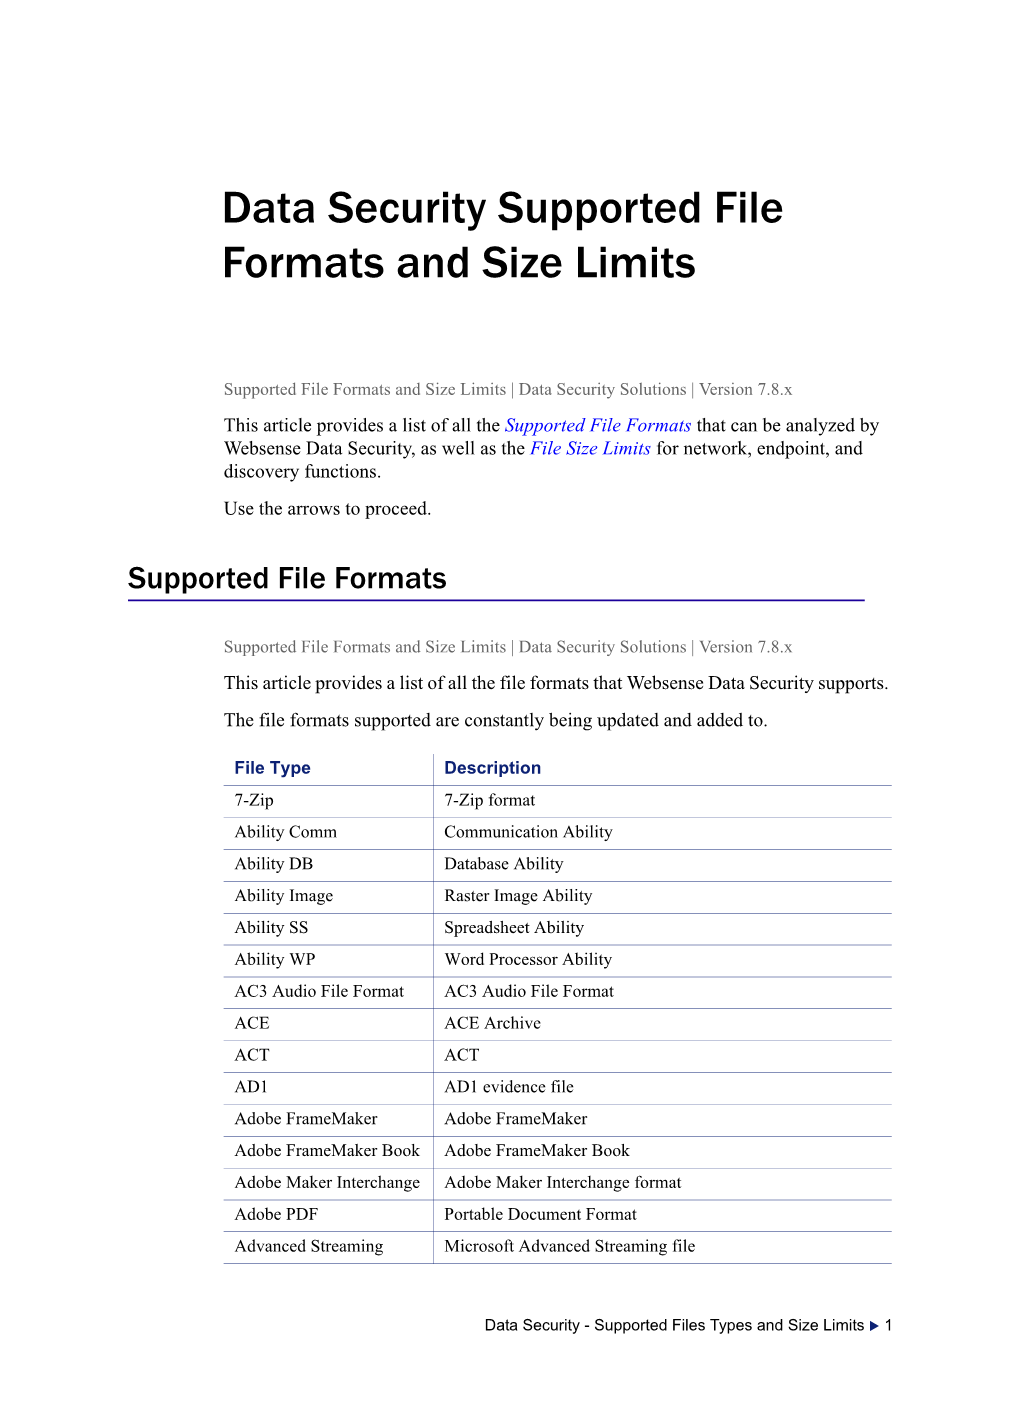 Supported File Types and Size Limits